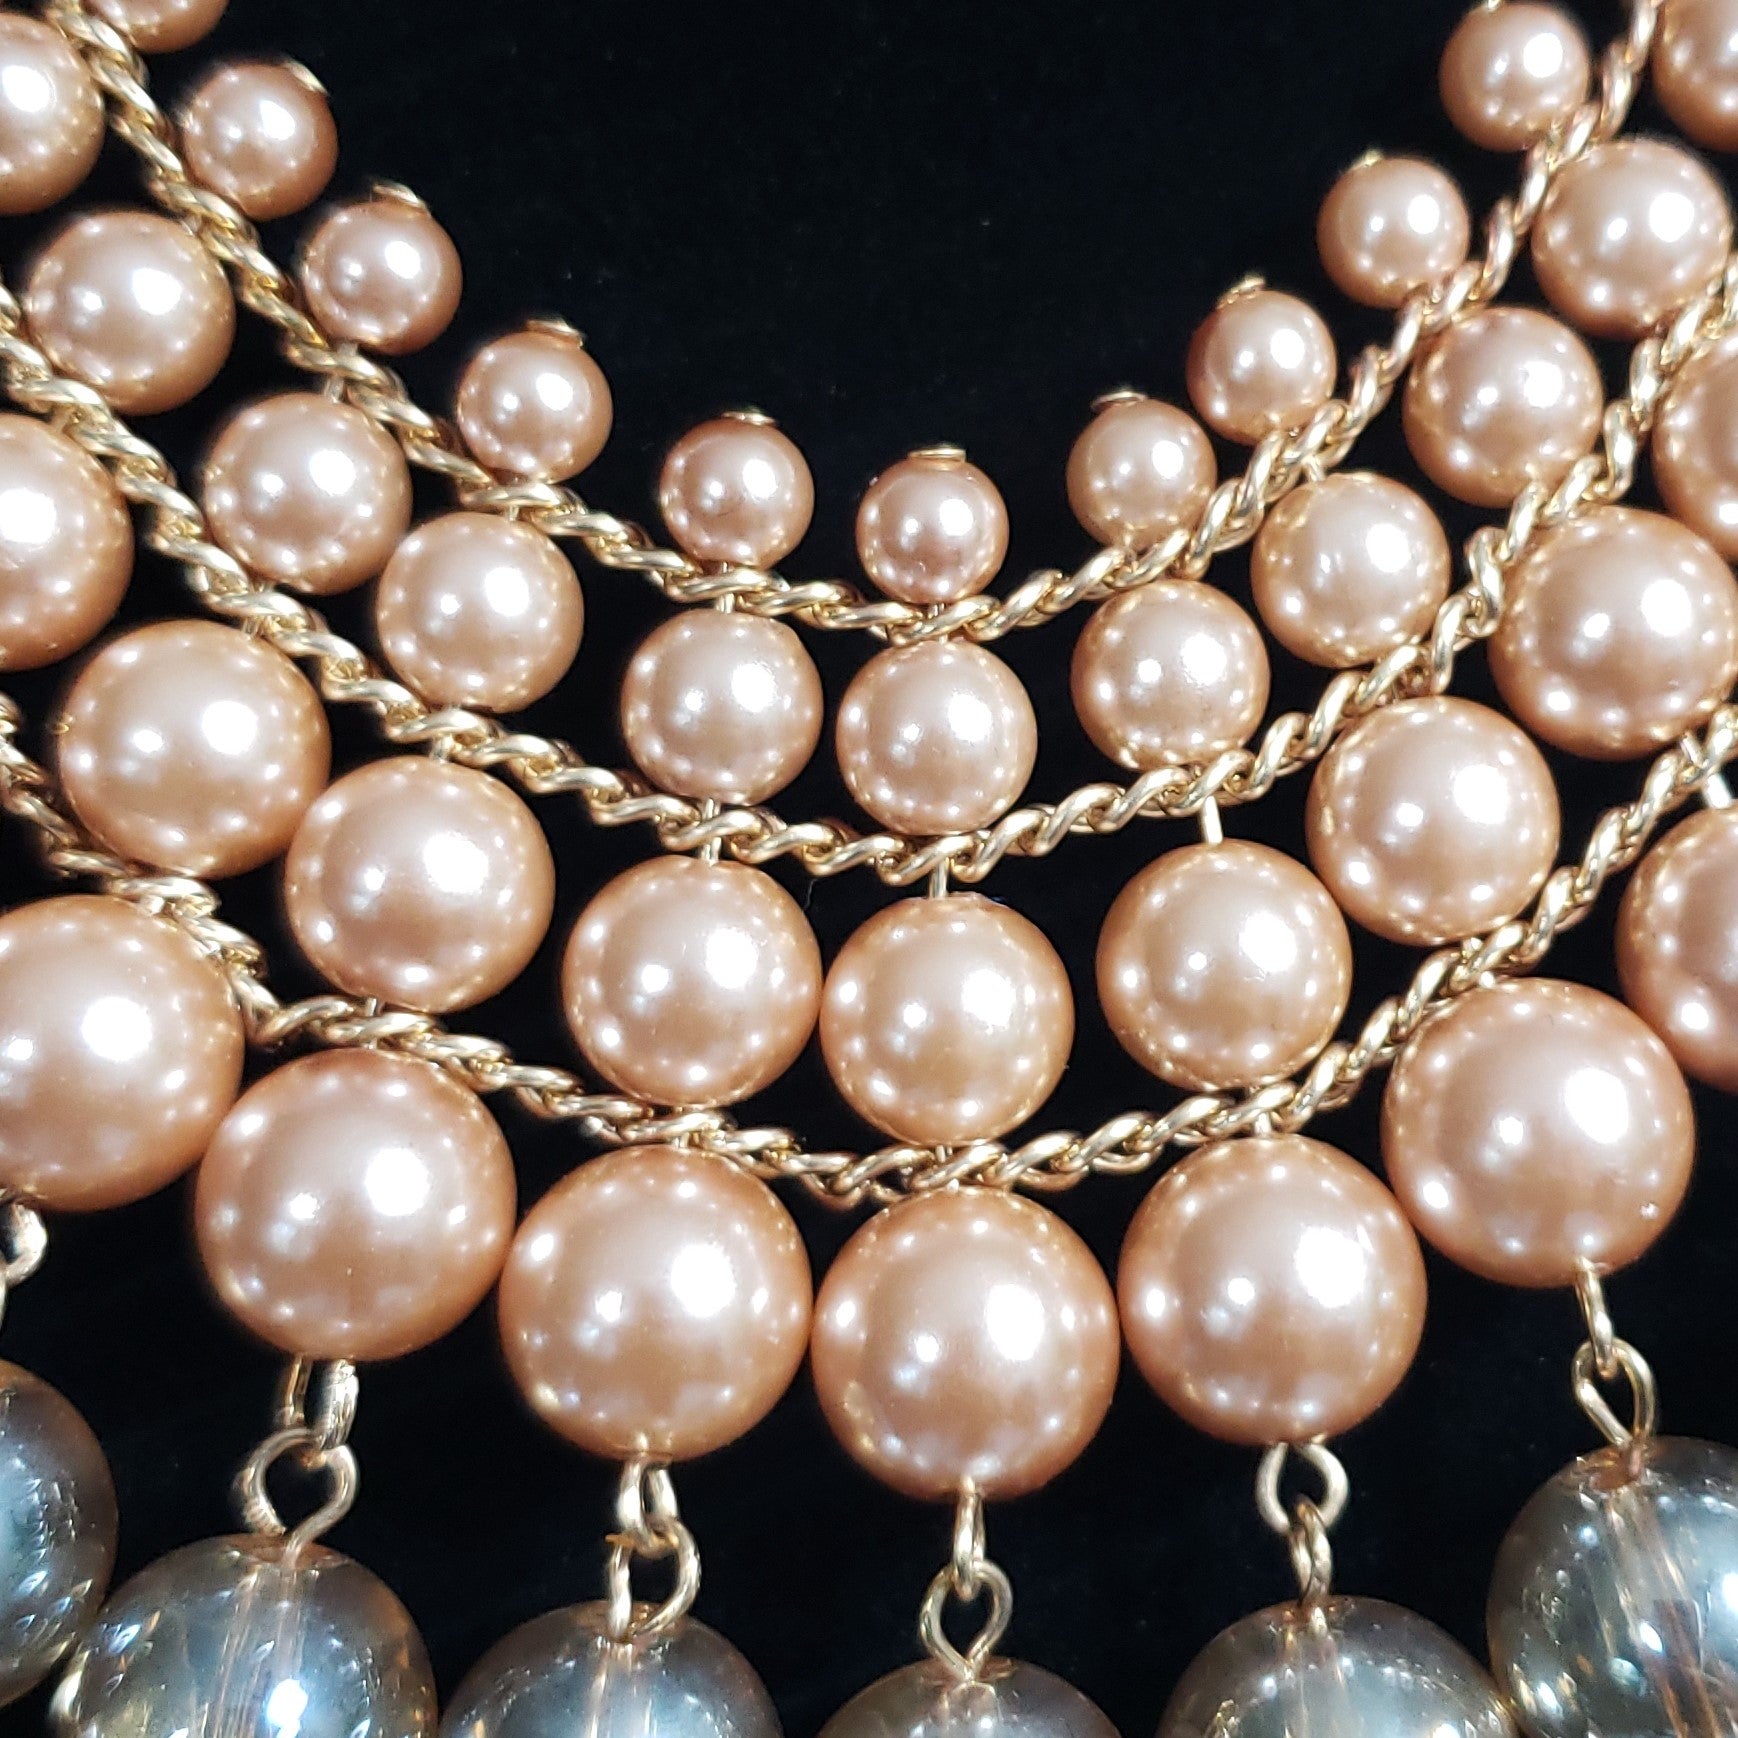 Isn’t she Lovely Simulated Champagne Chroma Pearl Champagne Glass Rosetone Necklace (20 in) - Houzz of DVA Boutique